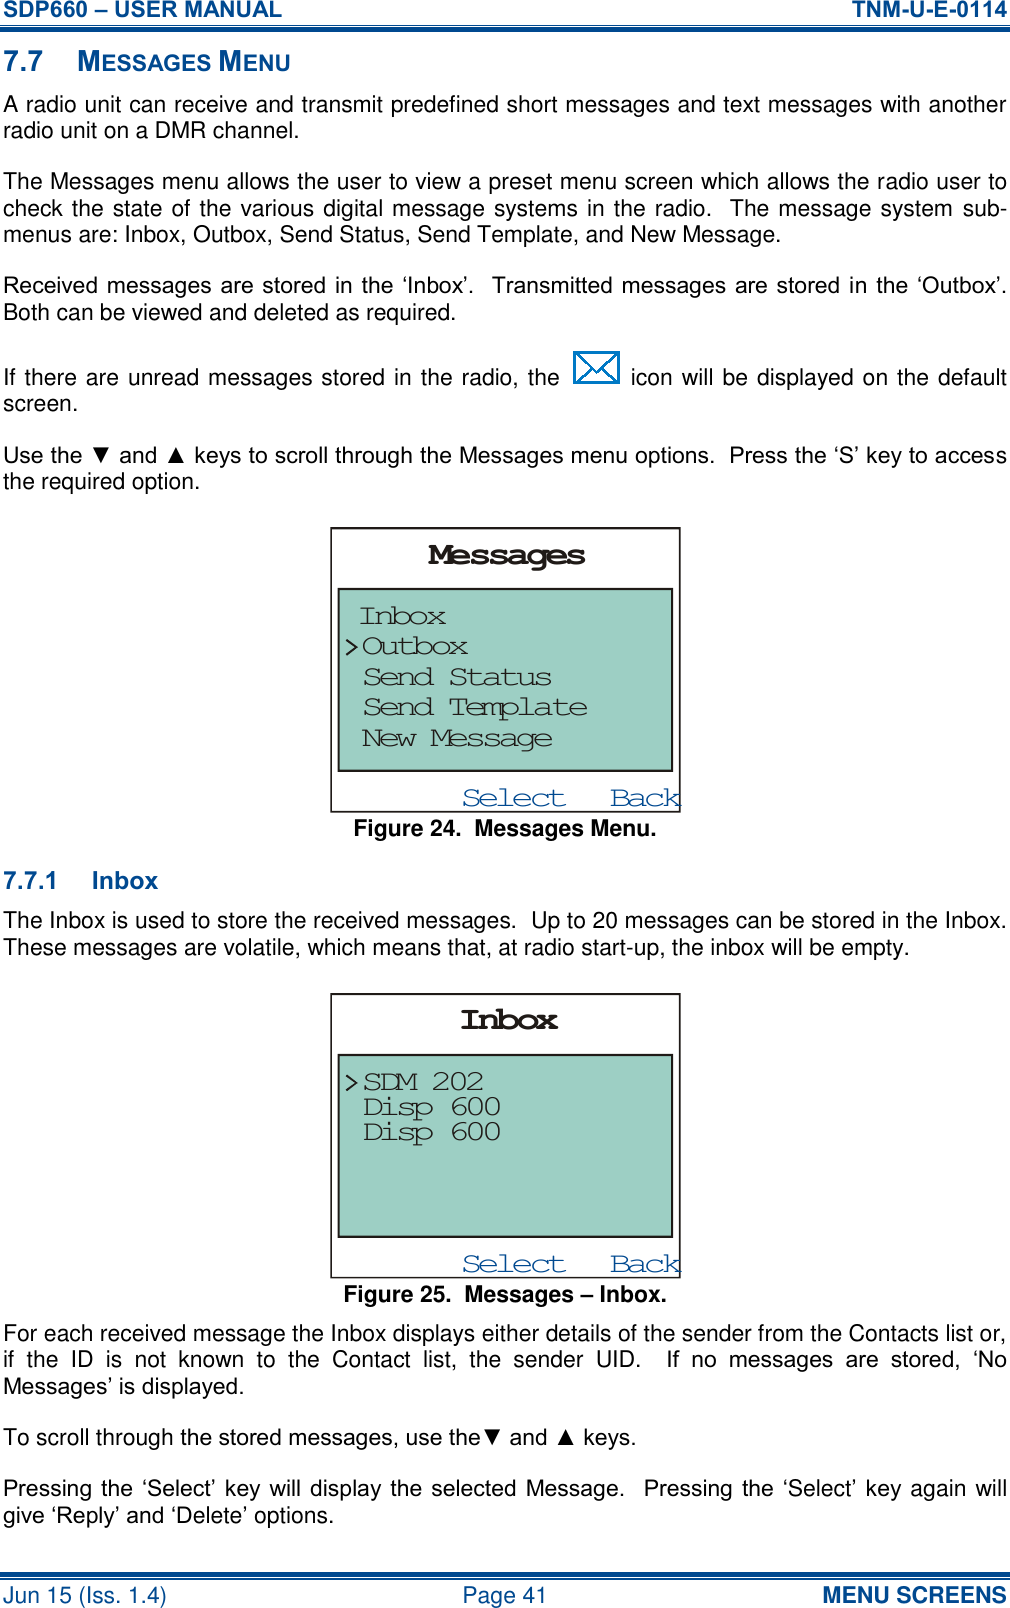 SDP660 – USER MANUAL  TNM-U-E-0114 Jun 15 (Iss. 1.4)  Page 41 MENU SCREENS 7.7 MESSAGES MENU A radio unit can receive and transmit predefined short messages and text messages with another radio unit on a DMR channel. The Messages menu allows the user to view a preset menu screen which allows the radio user to check the state of the various digital message systems in the radio.  The message system sub-menus are: Inbox, Outbox, Send Status, Send Template, and New Message. Received messages are stored in the ‘Inbox’.  Transmitted messages are stored in the ‘Outbox’.  Both can be viewed and deleted as required. If there are unread messages stored in the radio, the   icon will be displayed on the default screen. Use the ▼ and ▲ keys to scroll through the Messages menu options.  Press the ‘S’ key to access the required option. Figure 24.  Messages Menu. 7.7.1 Inbox The Inbox is used to store the received messages.  Up to 20 messages can be stored in the Inbox.  These messages are volatile, which means that, at radio start-up, the inbox will be empty. Figure 25.  Messages – Inbox. For each received message the Inbox displays either details of the sender from the Contacts list or, if  the  ID  is  not  known  to  the  Contact  list,  the  sender  UID.    If  no  messages  are  stored,  ‘No Messages’ is displayed. To scroll through the stored messages, use the▼ and ▲ keys. Pressing the  ‘Select’ key will display the  selected Message.    Pressing the ‘Select’  key again will give ‘Reply’ and ‘Delete’ options. BackSelectMessagesInboxOutboxSend StatusSend TemplateNew MessageBackSelectInboxDisp 600SDM 202Disp 600